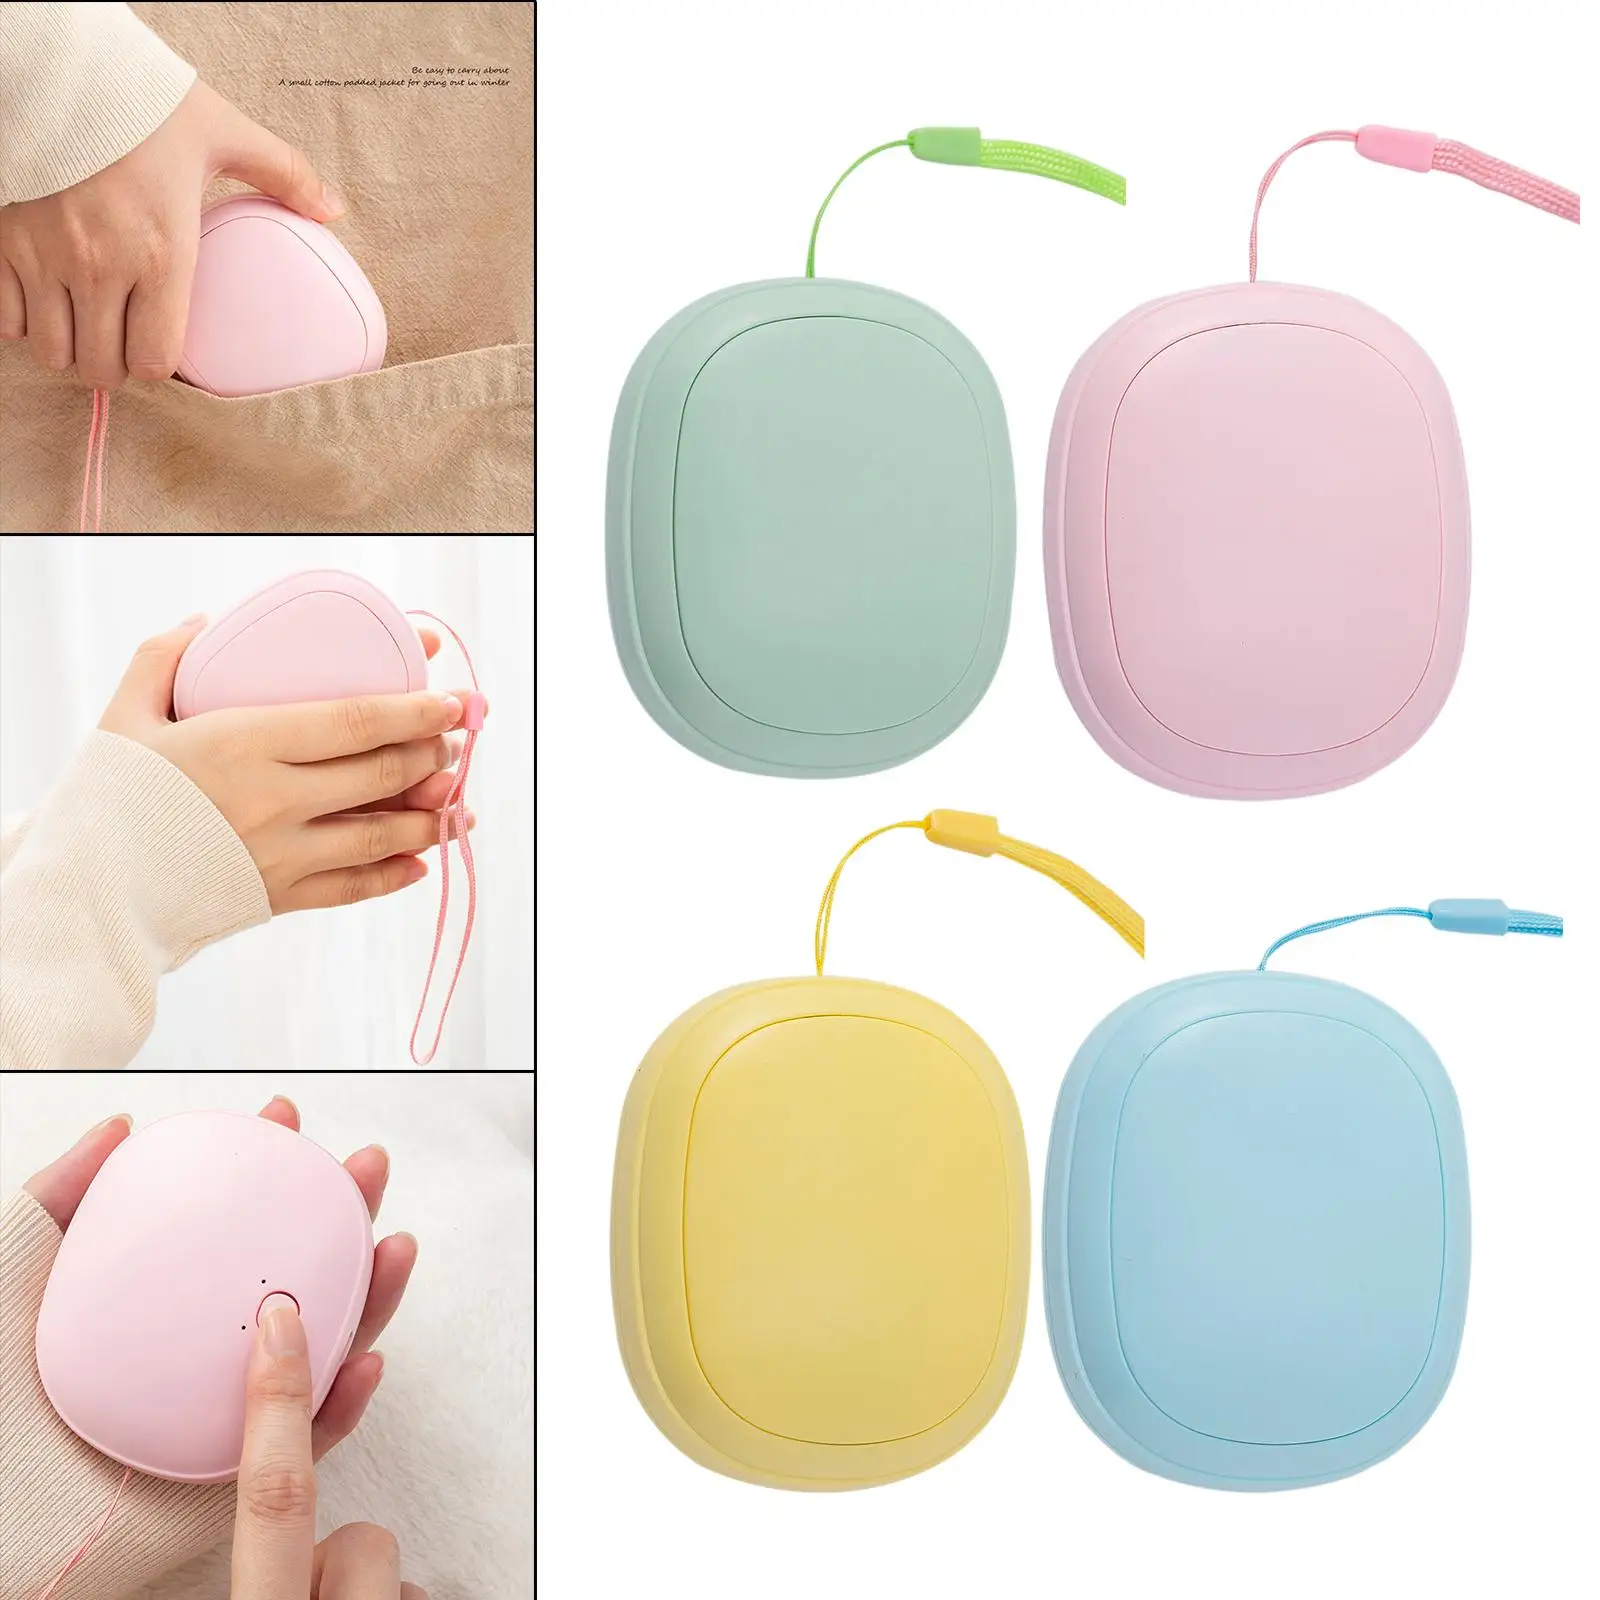 Cute Hand Warmer -Sided Heating Rechargeable Hand Holding Lanyard 1200mAh